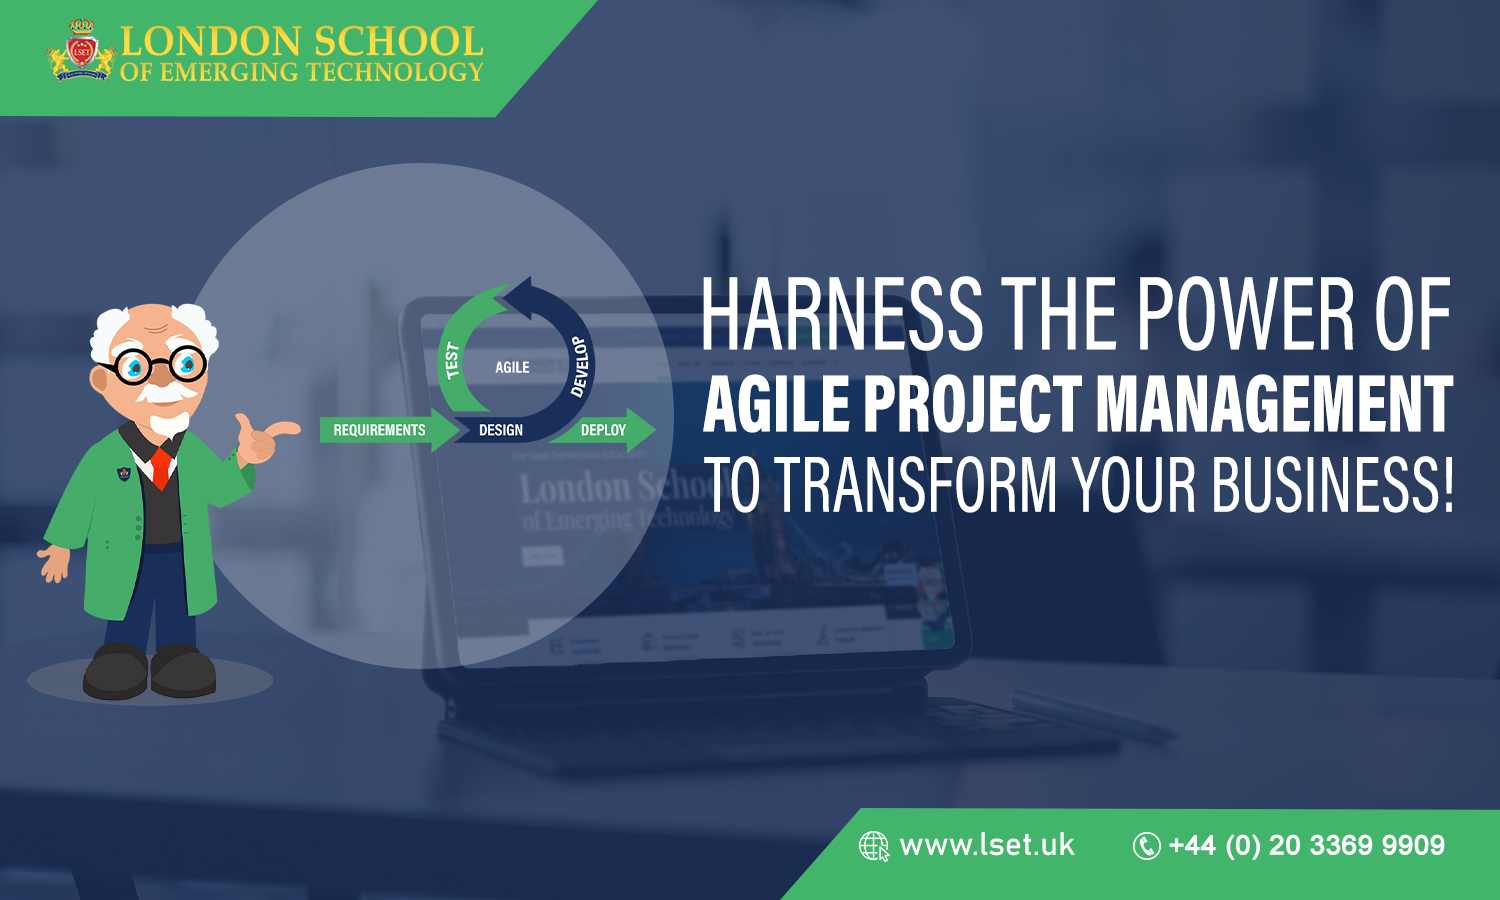 Harness the Power of Agile Project Management to Transform Your Business!